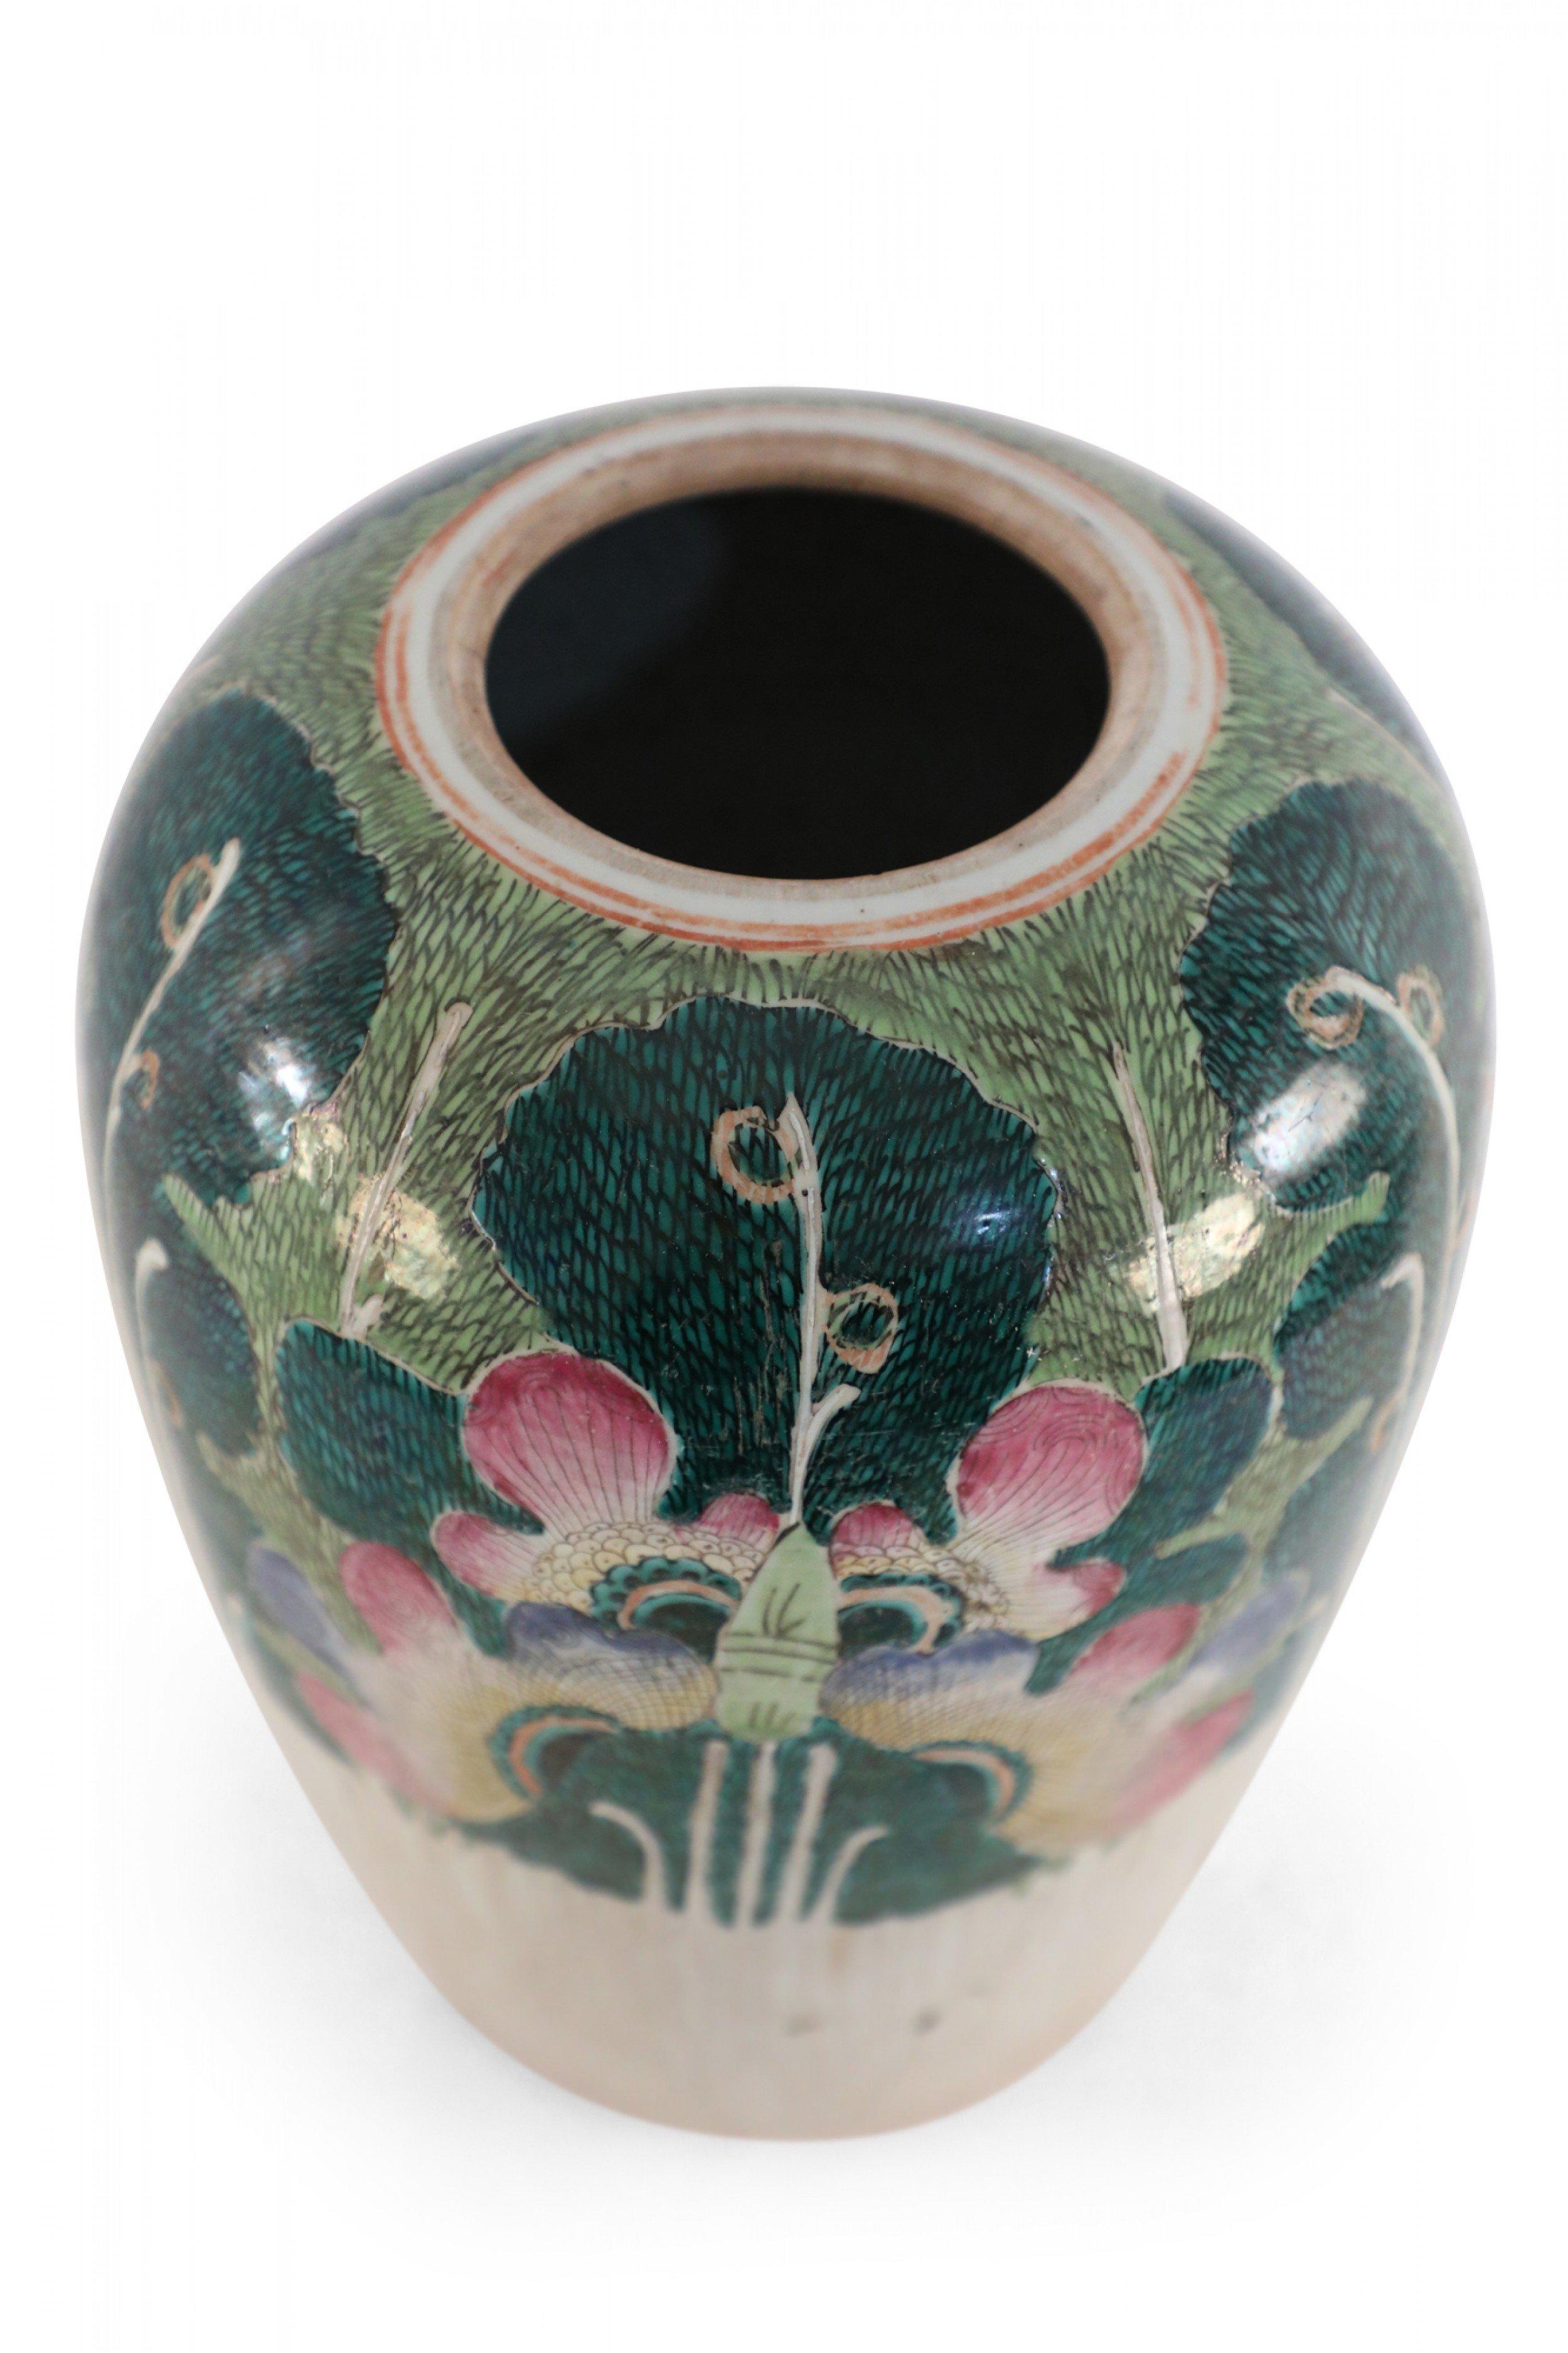 Antique Chinese (Early 20th Century) winter melon-form porcelain vase decorated with an incised, white bottom half that grows into verdant abstracted vegetal and peacock shapes on the top half in hues of green, pink and purple. The base includes a